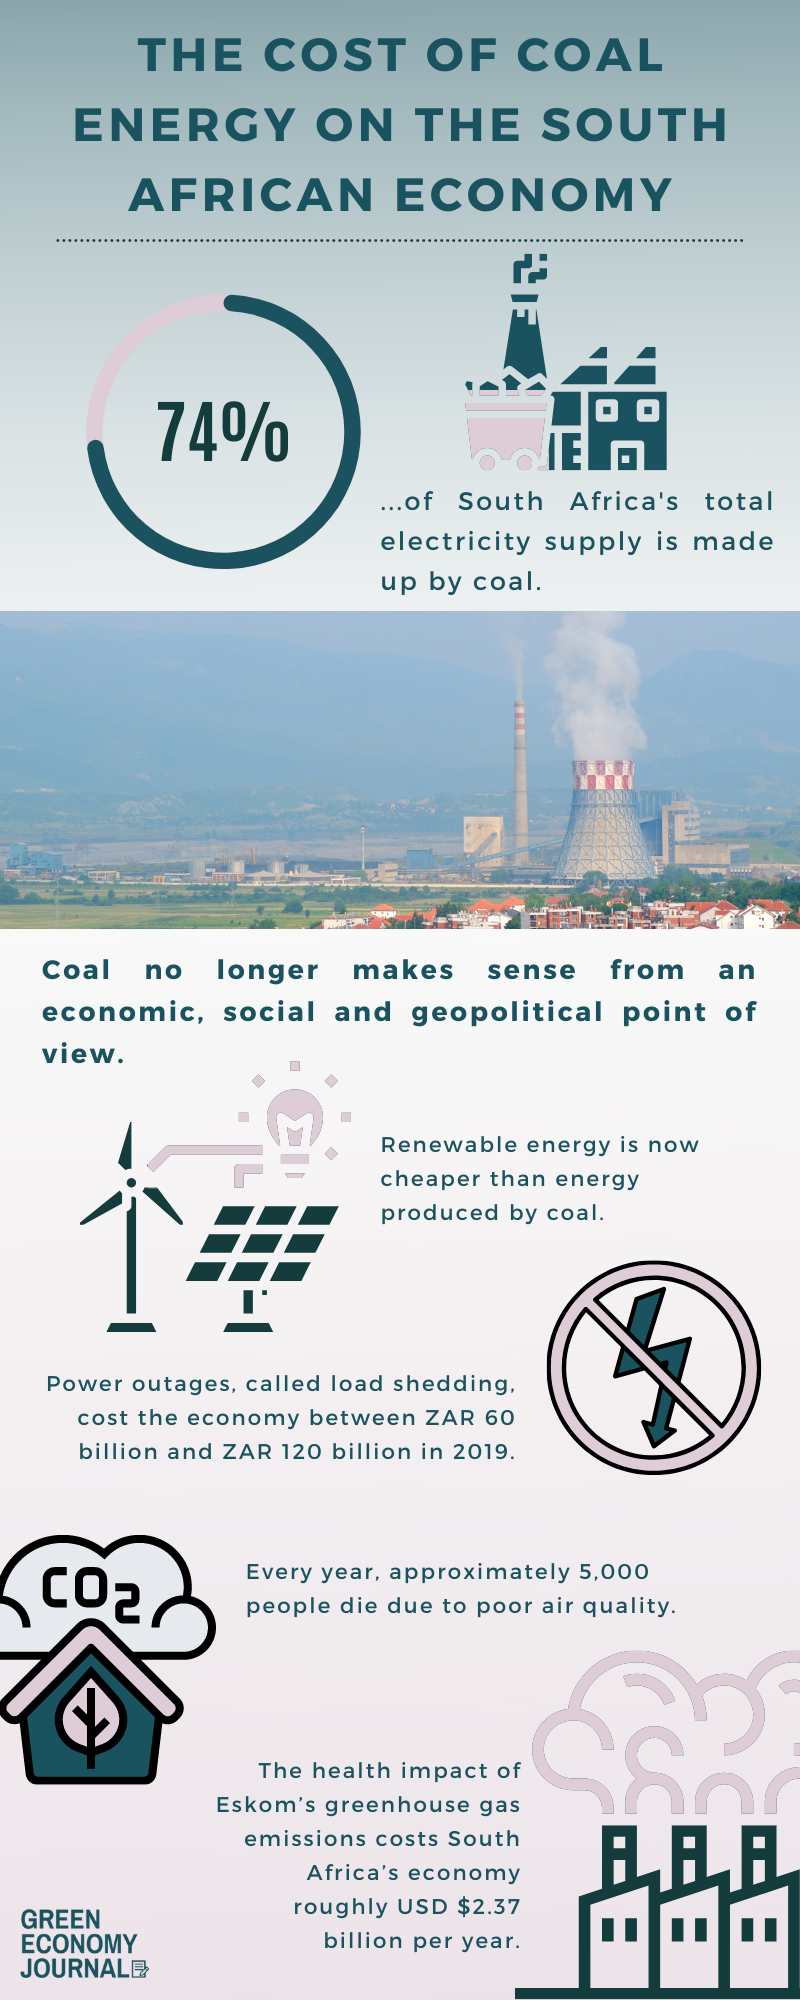 The cost of coal energy on the South African economy